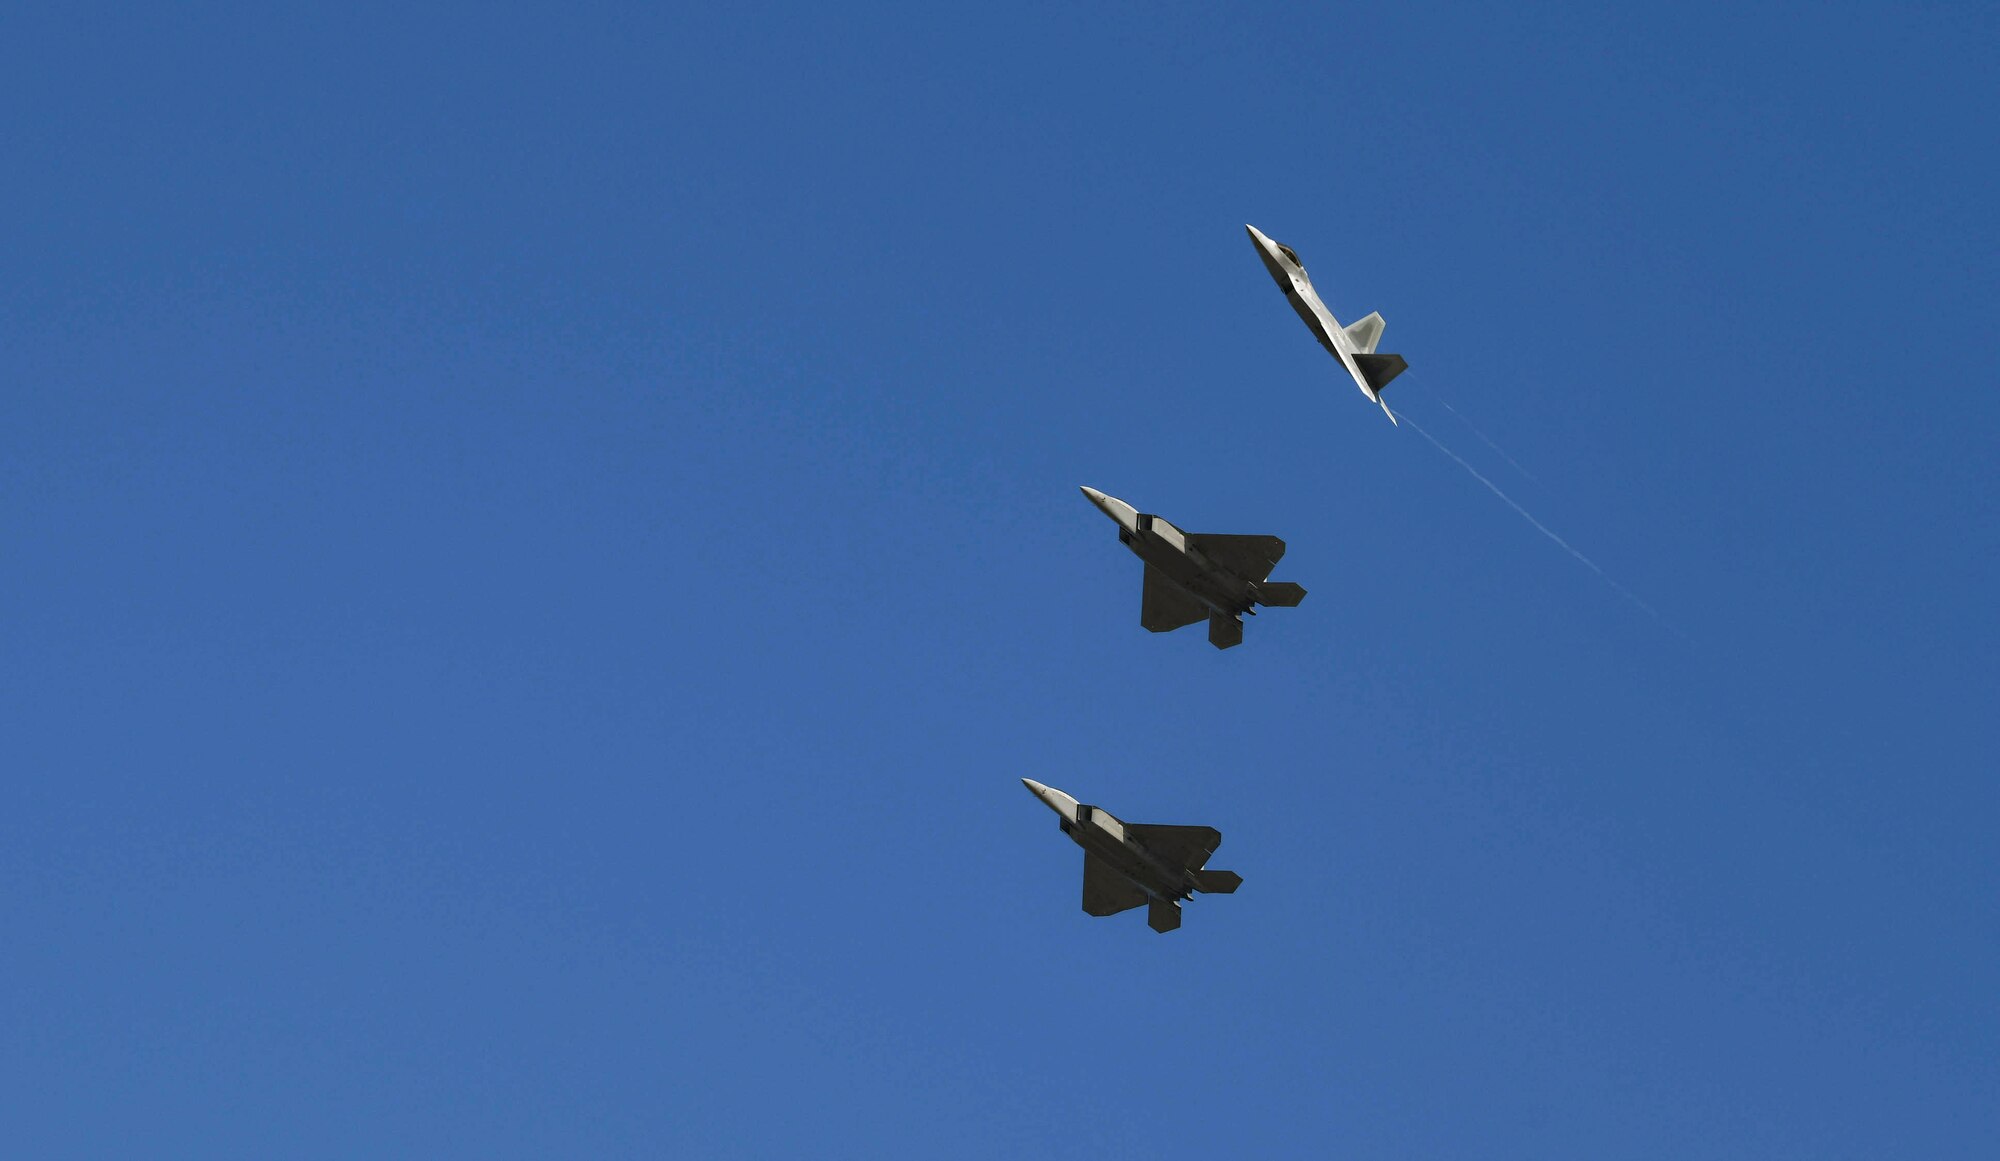 F-22 Raptors from Joint Base Elmendorf-Richardson, Alaska, fly over Tyndall Air Force Base, Florida, Oct. 30, 2020. JBER sent some of it's F-22s to participate in Checkered Flag 21-1, one of the largest air-to-air combat exercises in the Department of Defense. (U.S. Air Force photo by Amn Anabel Del Valle